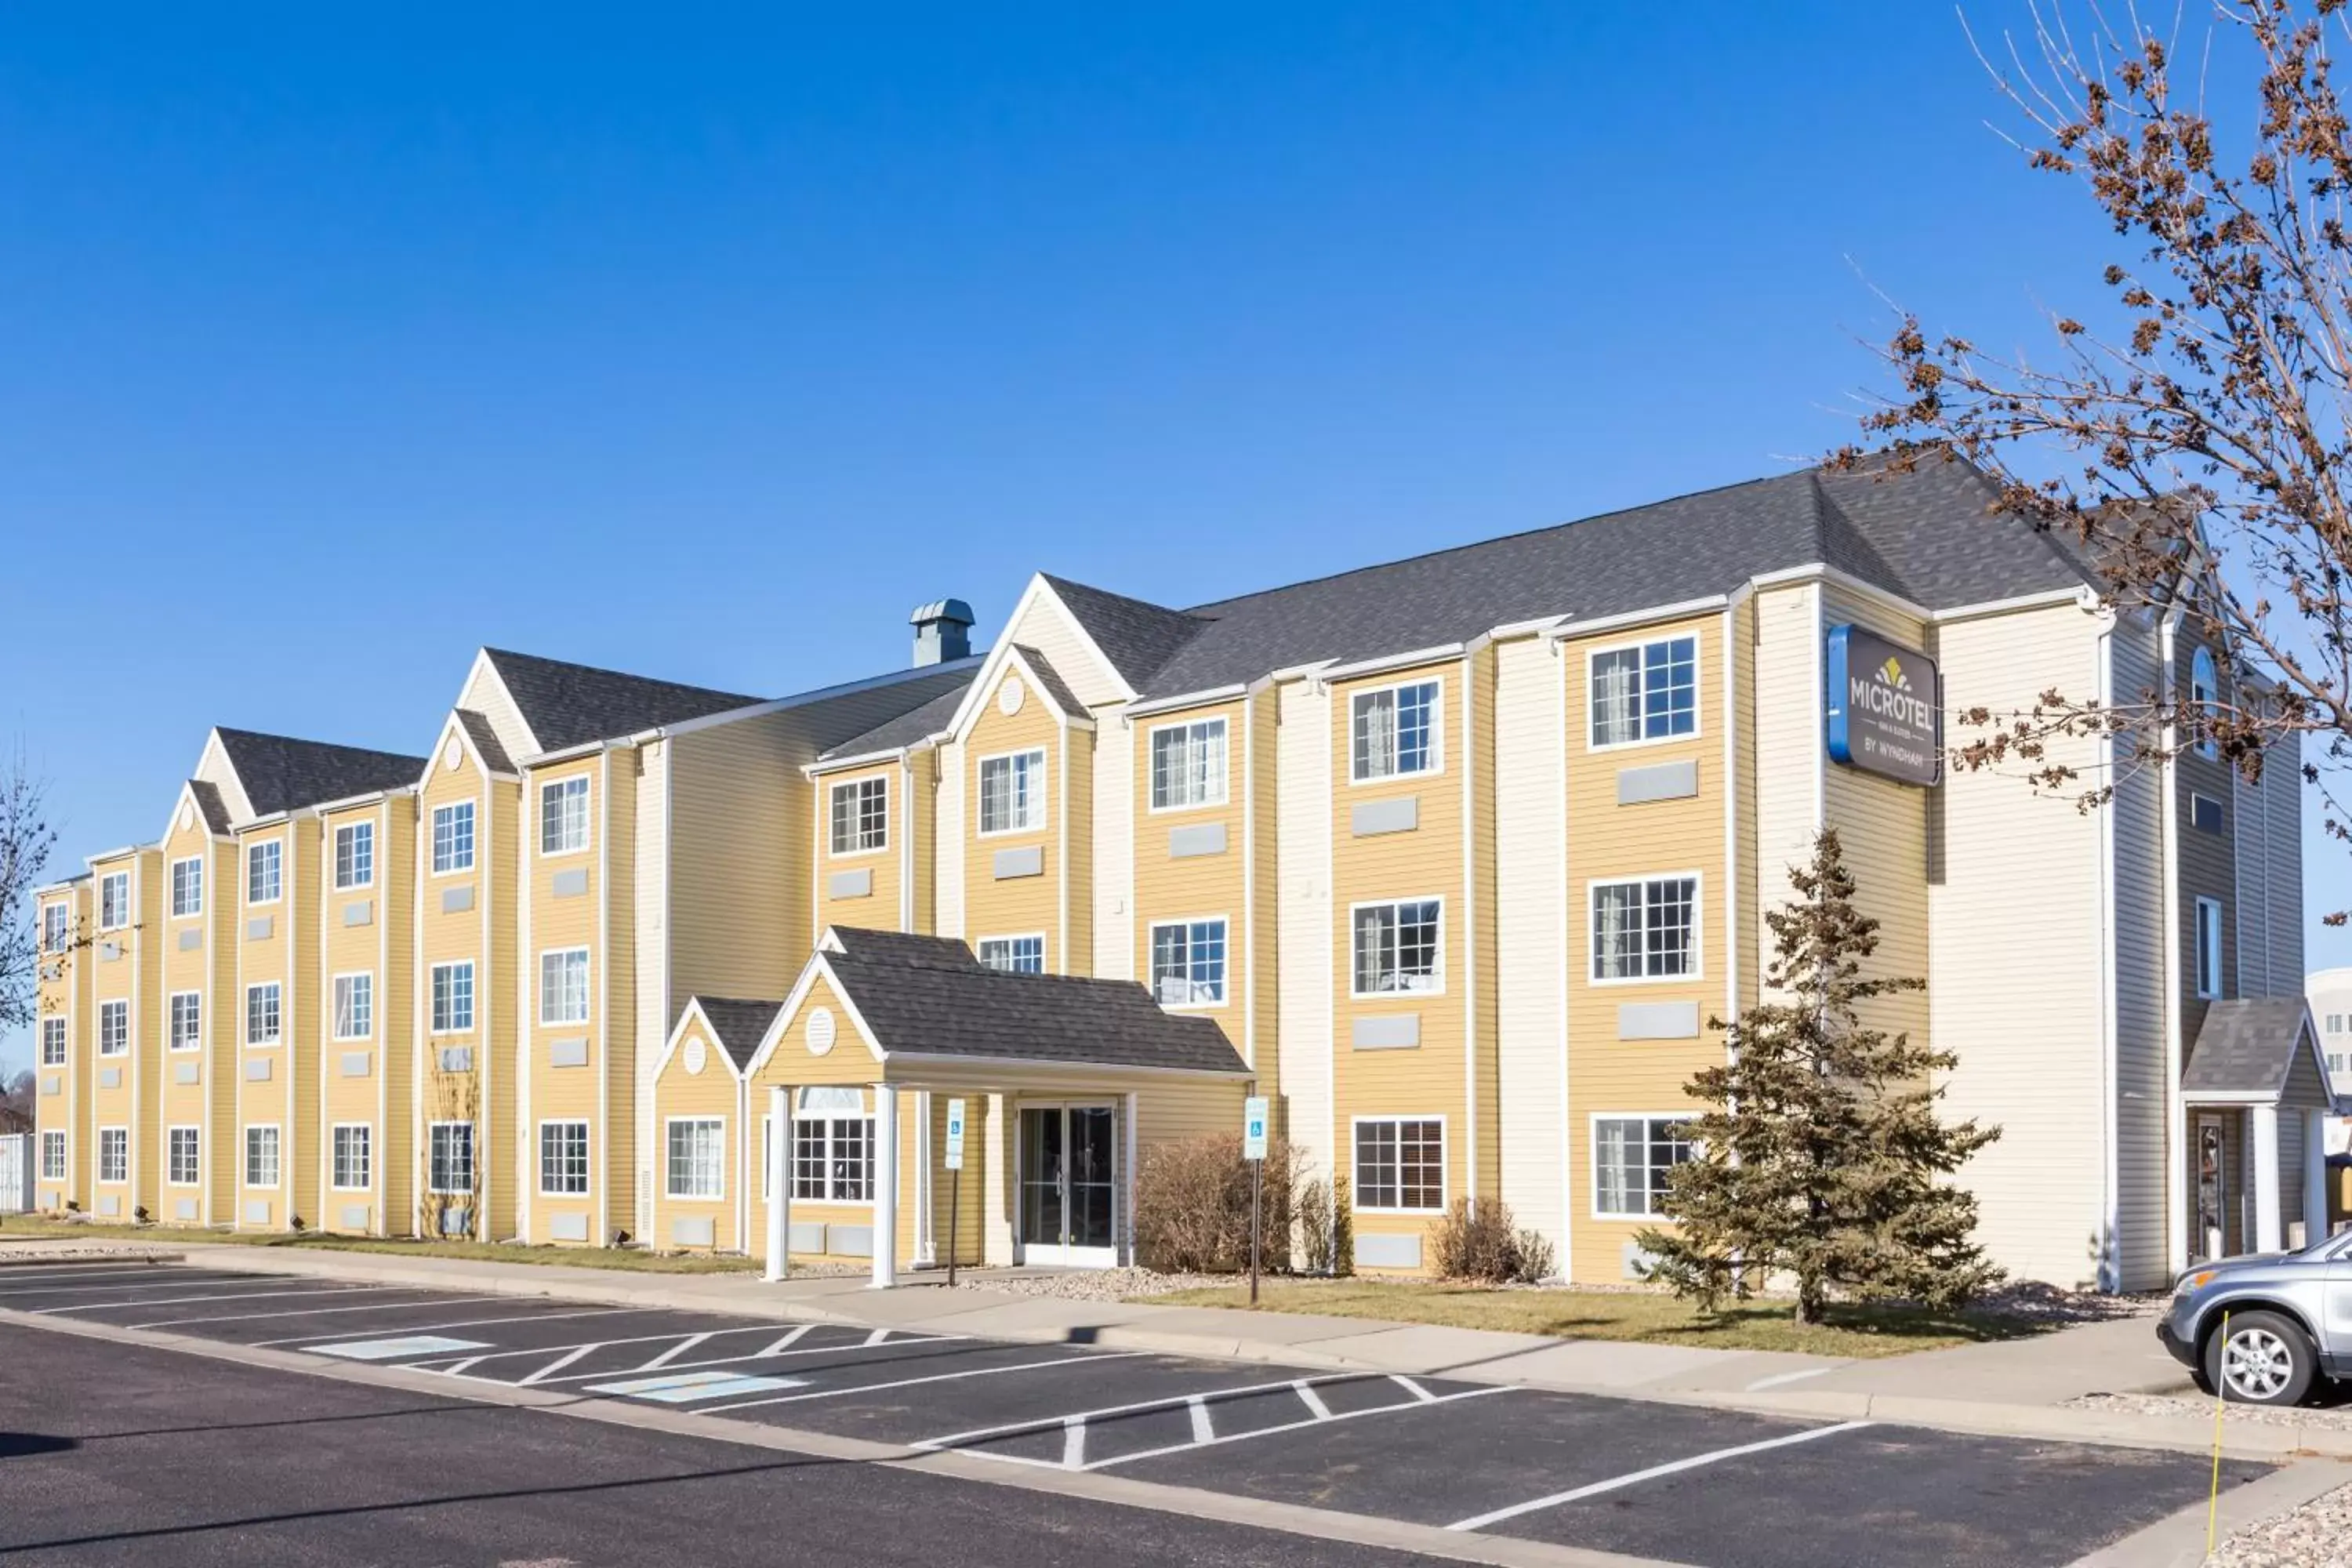 Facade/entrance, Property Building in Microtel Inn & Suites by Wyndham Sioux Falls